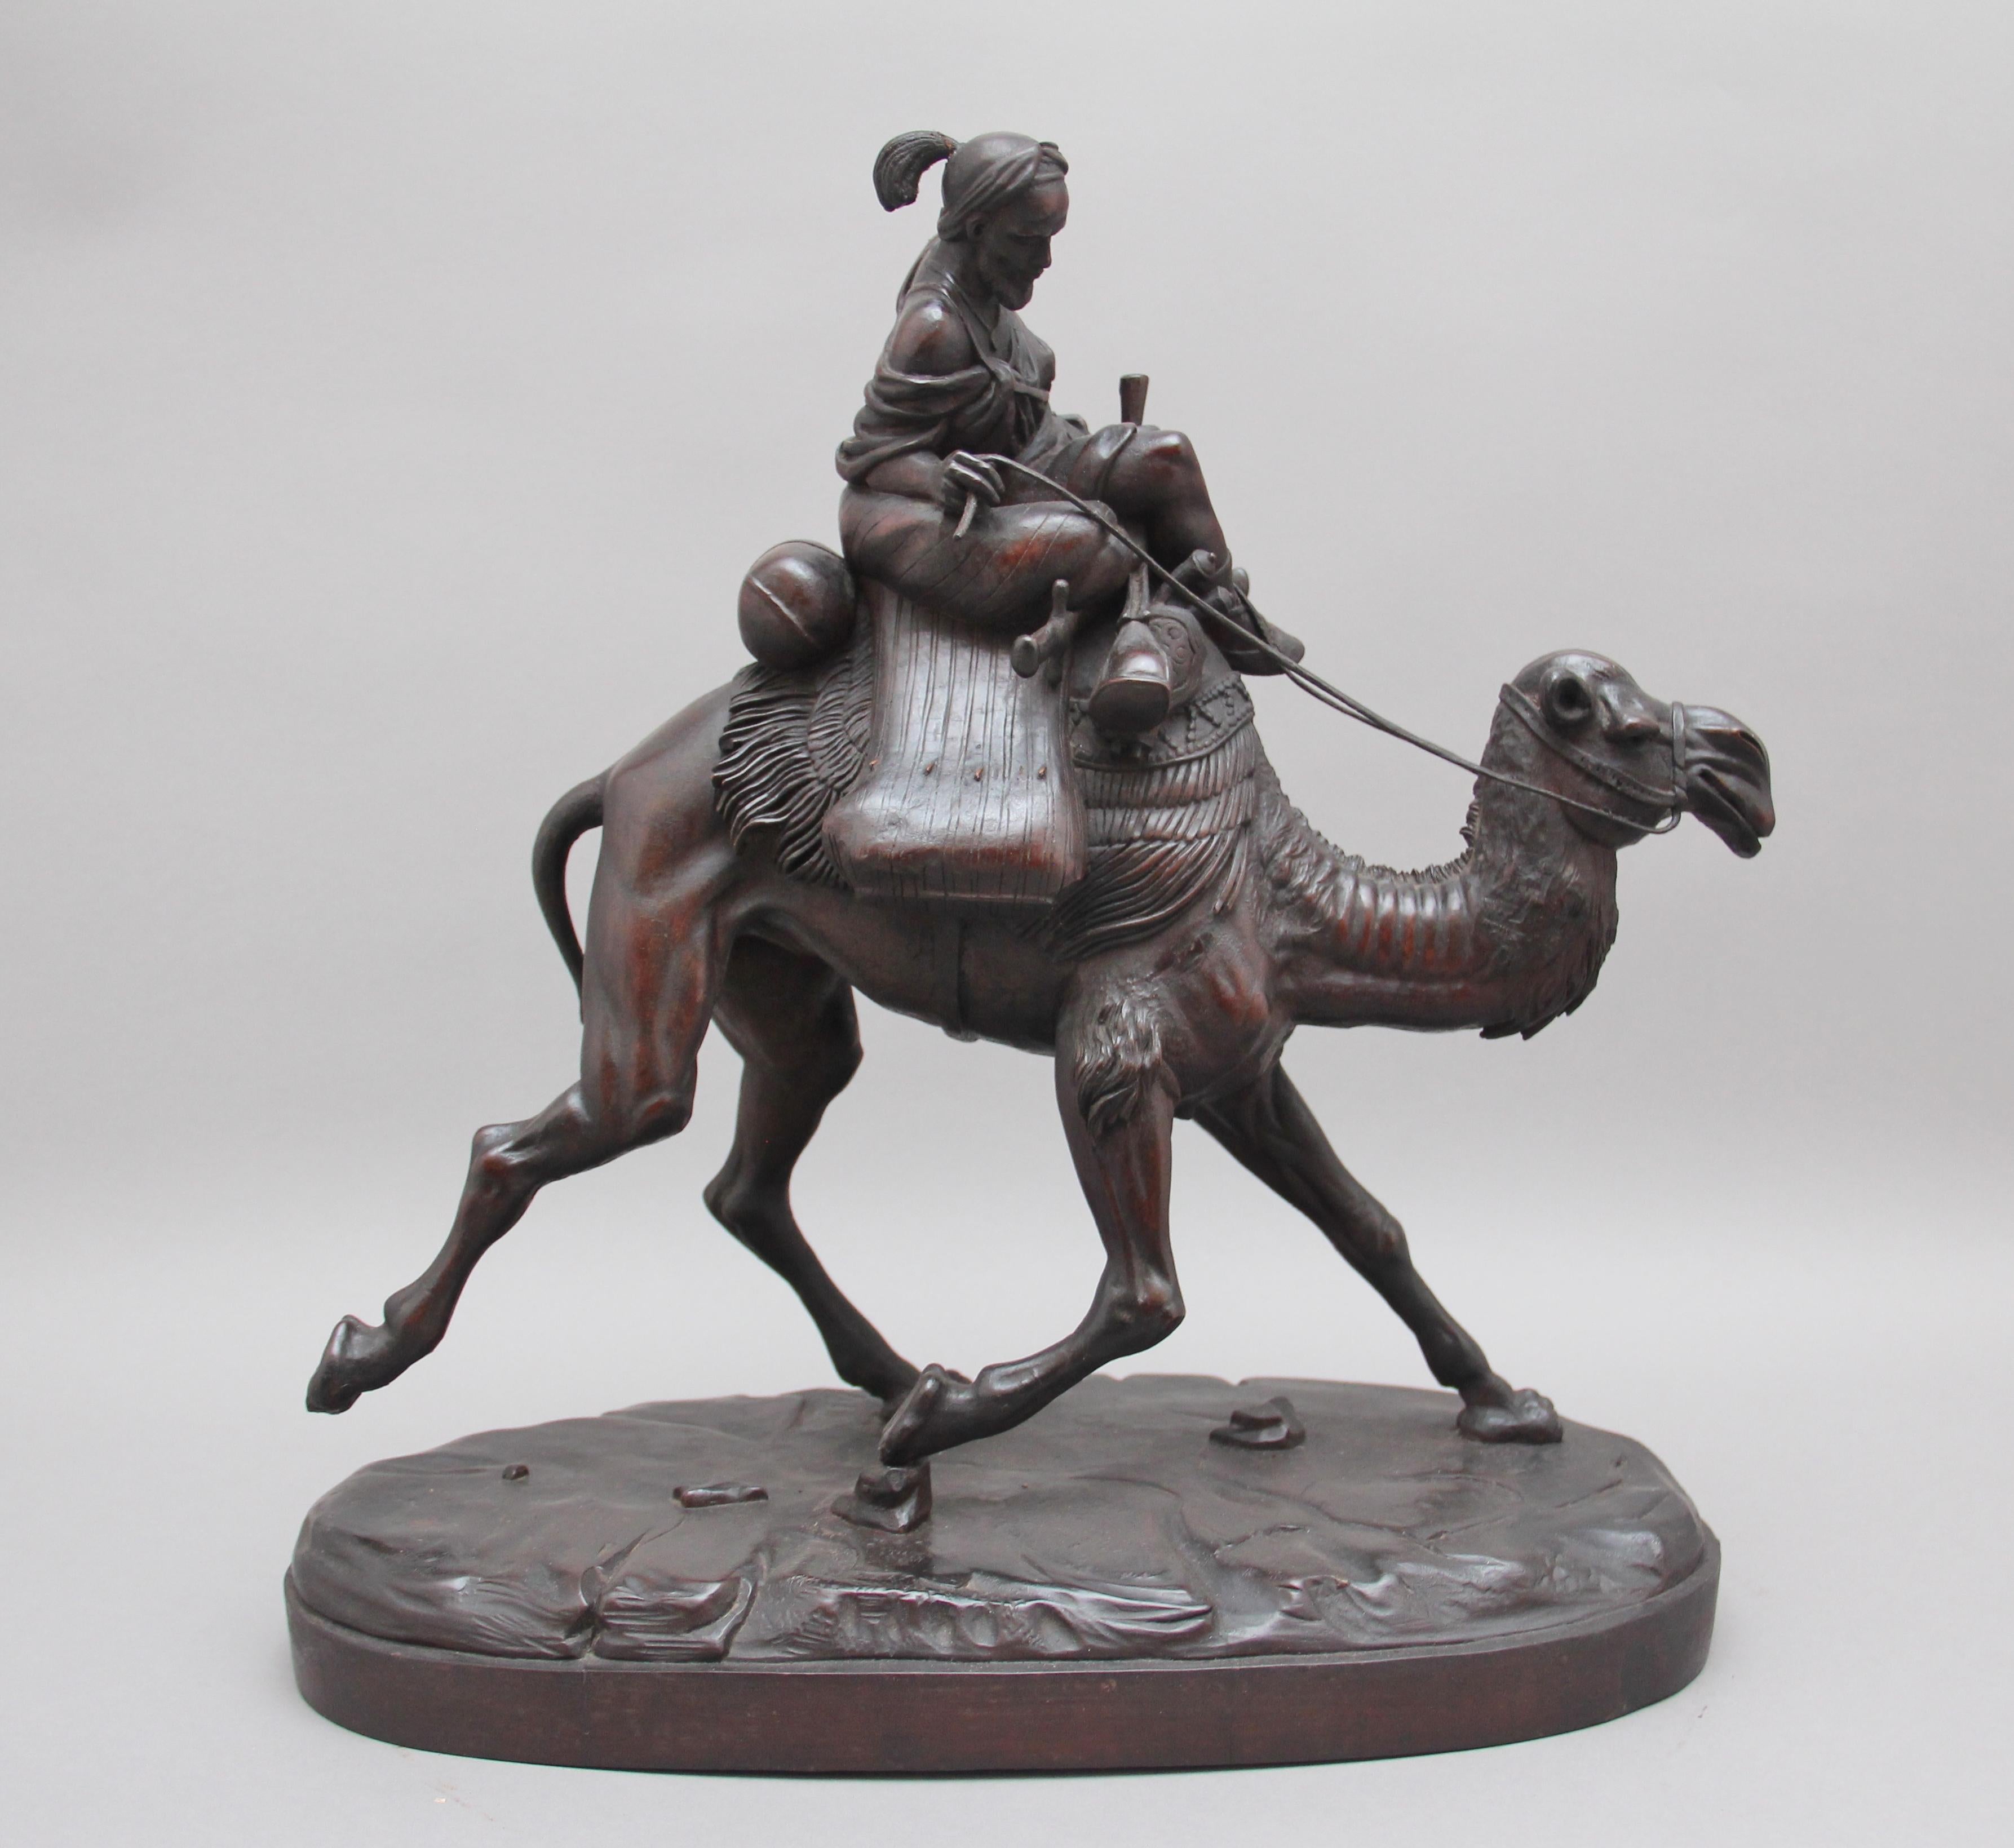 A very rare superb quality 19th century black forest carving of an Arab riding a racing camel, the quality and execution of the carving is fabulous. Camel racing on the Arabian peninsula has been going on for centuries and is now a popular sport,